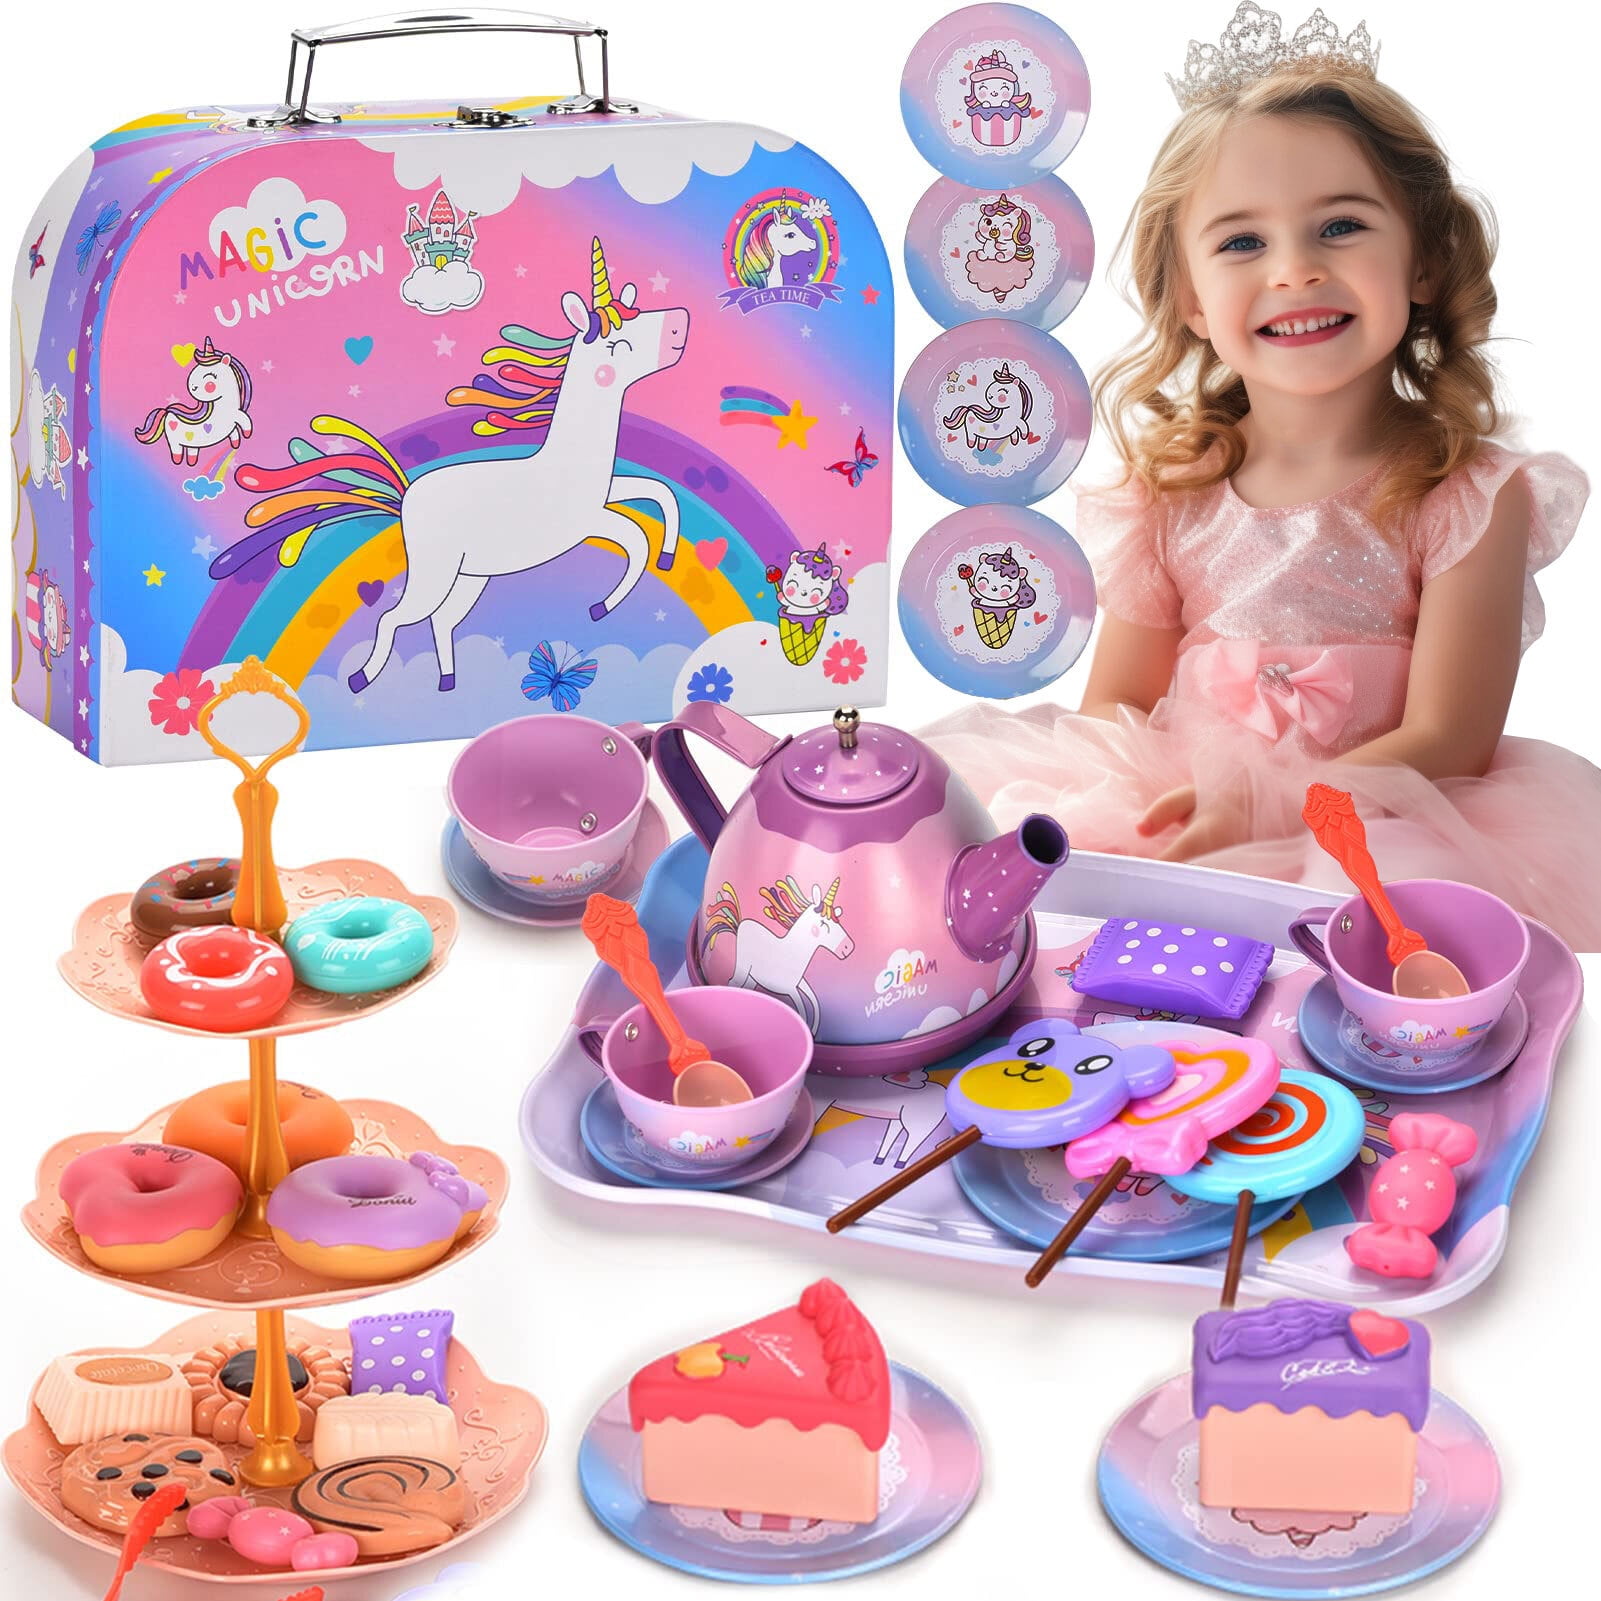 48pc Mermaid Tea Party Set for Little Girls,Birthday Gifts Age 3 4